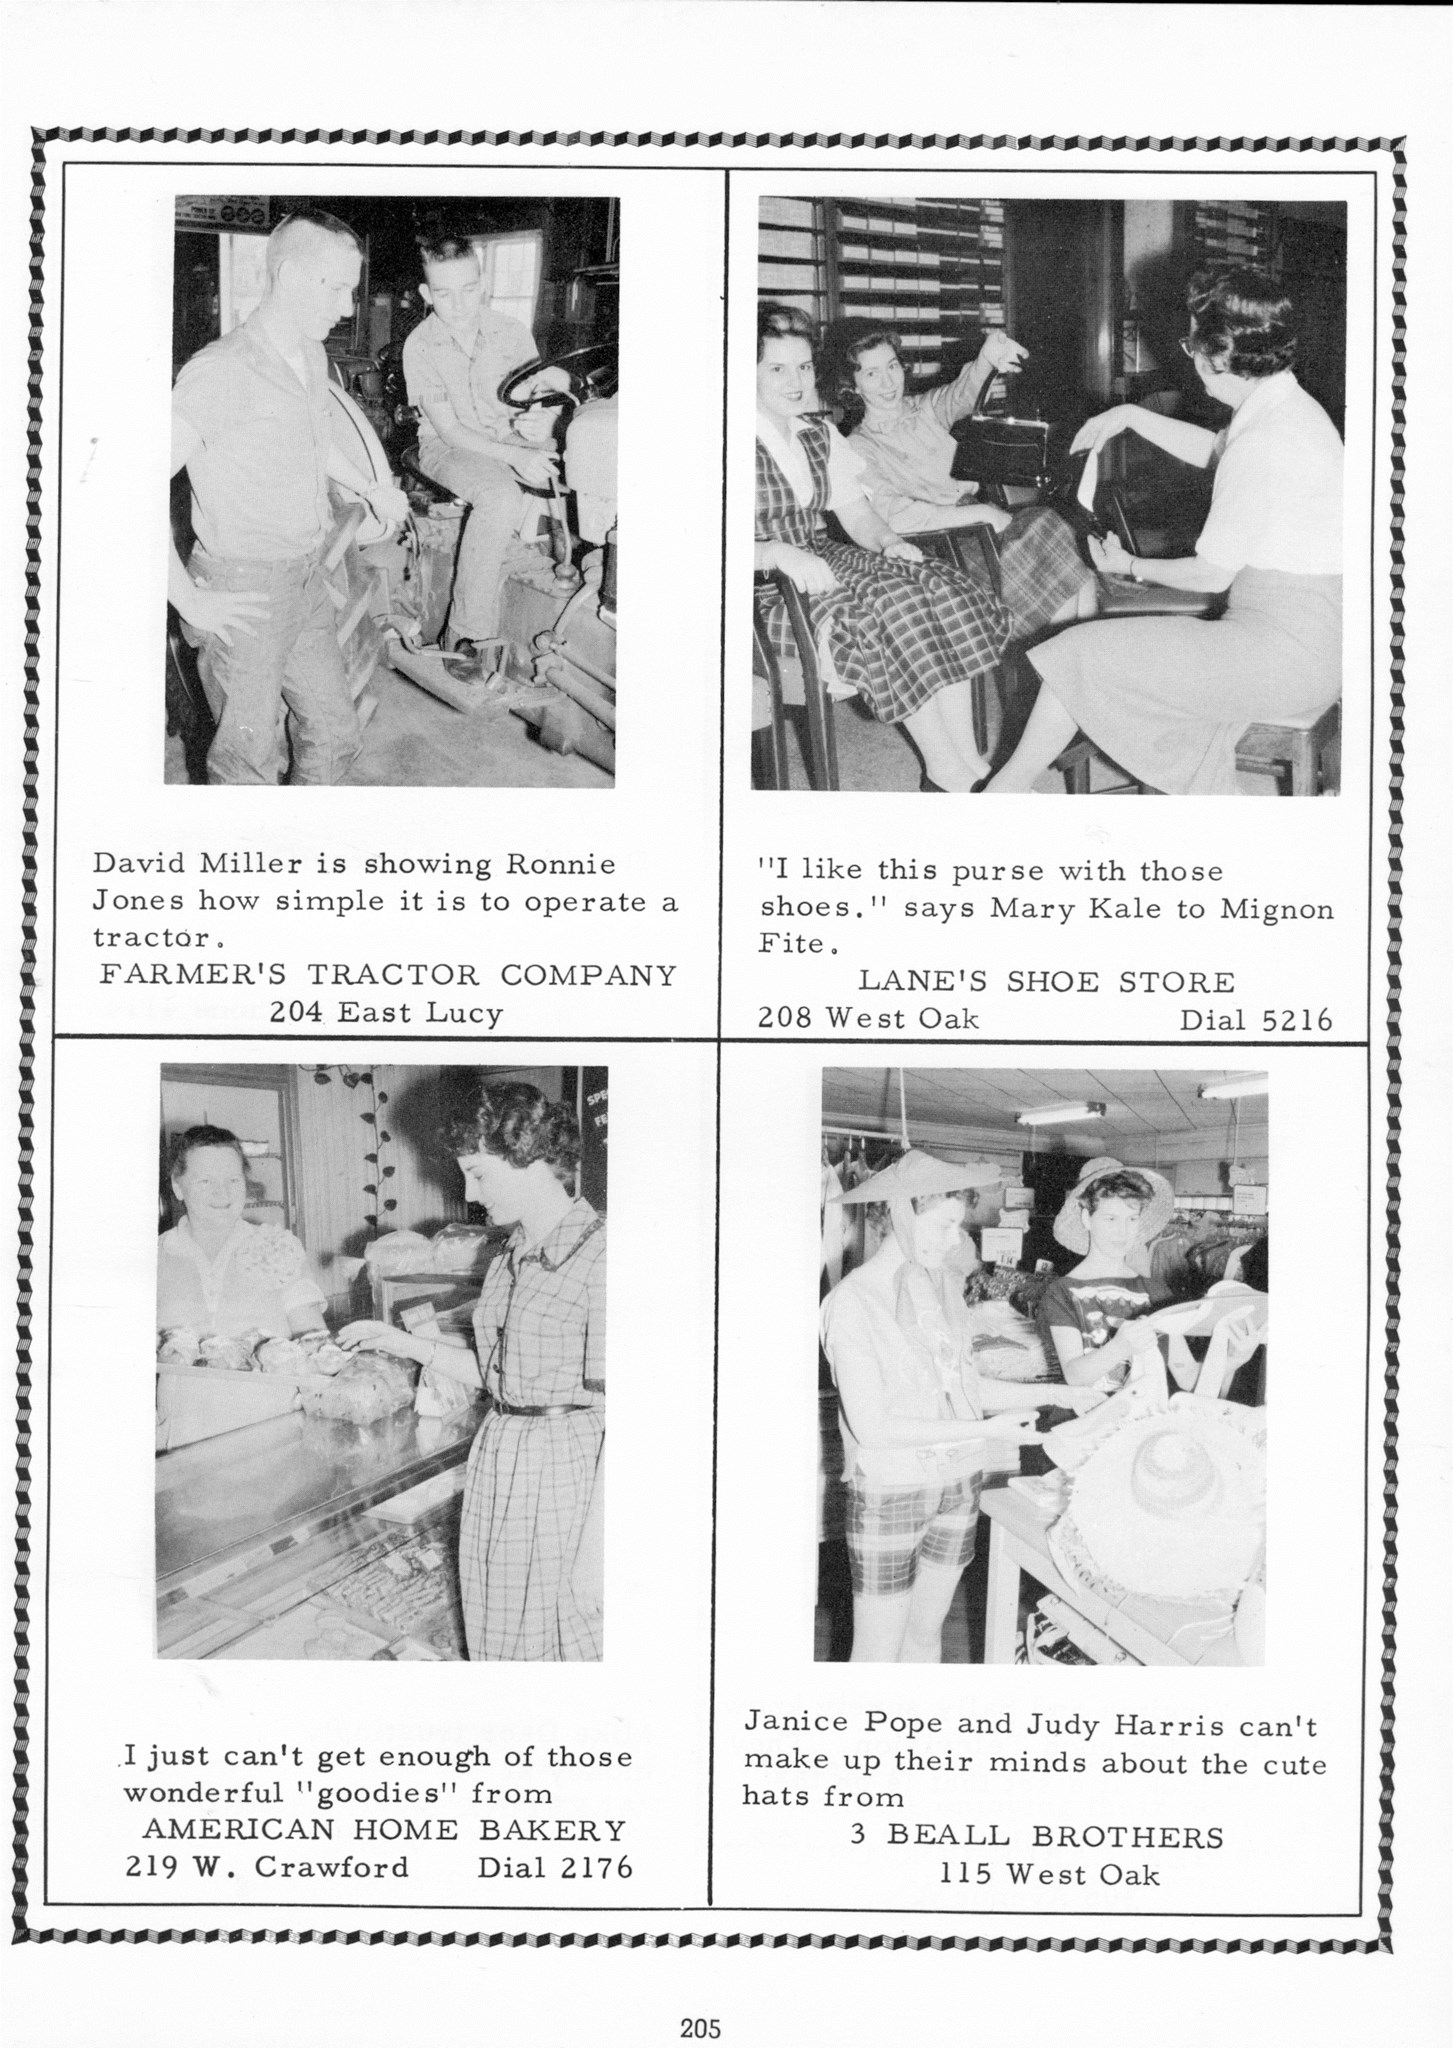 ../../../Images/Large/1960/Arclight-1960-pg0205.jpg